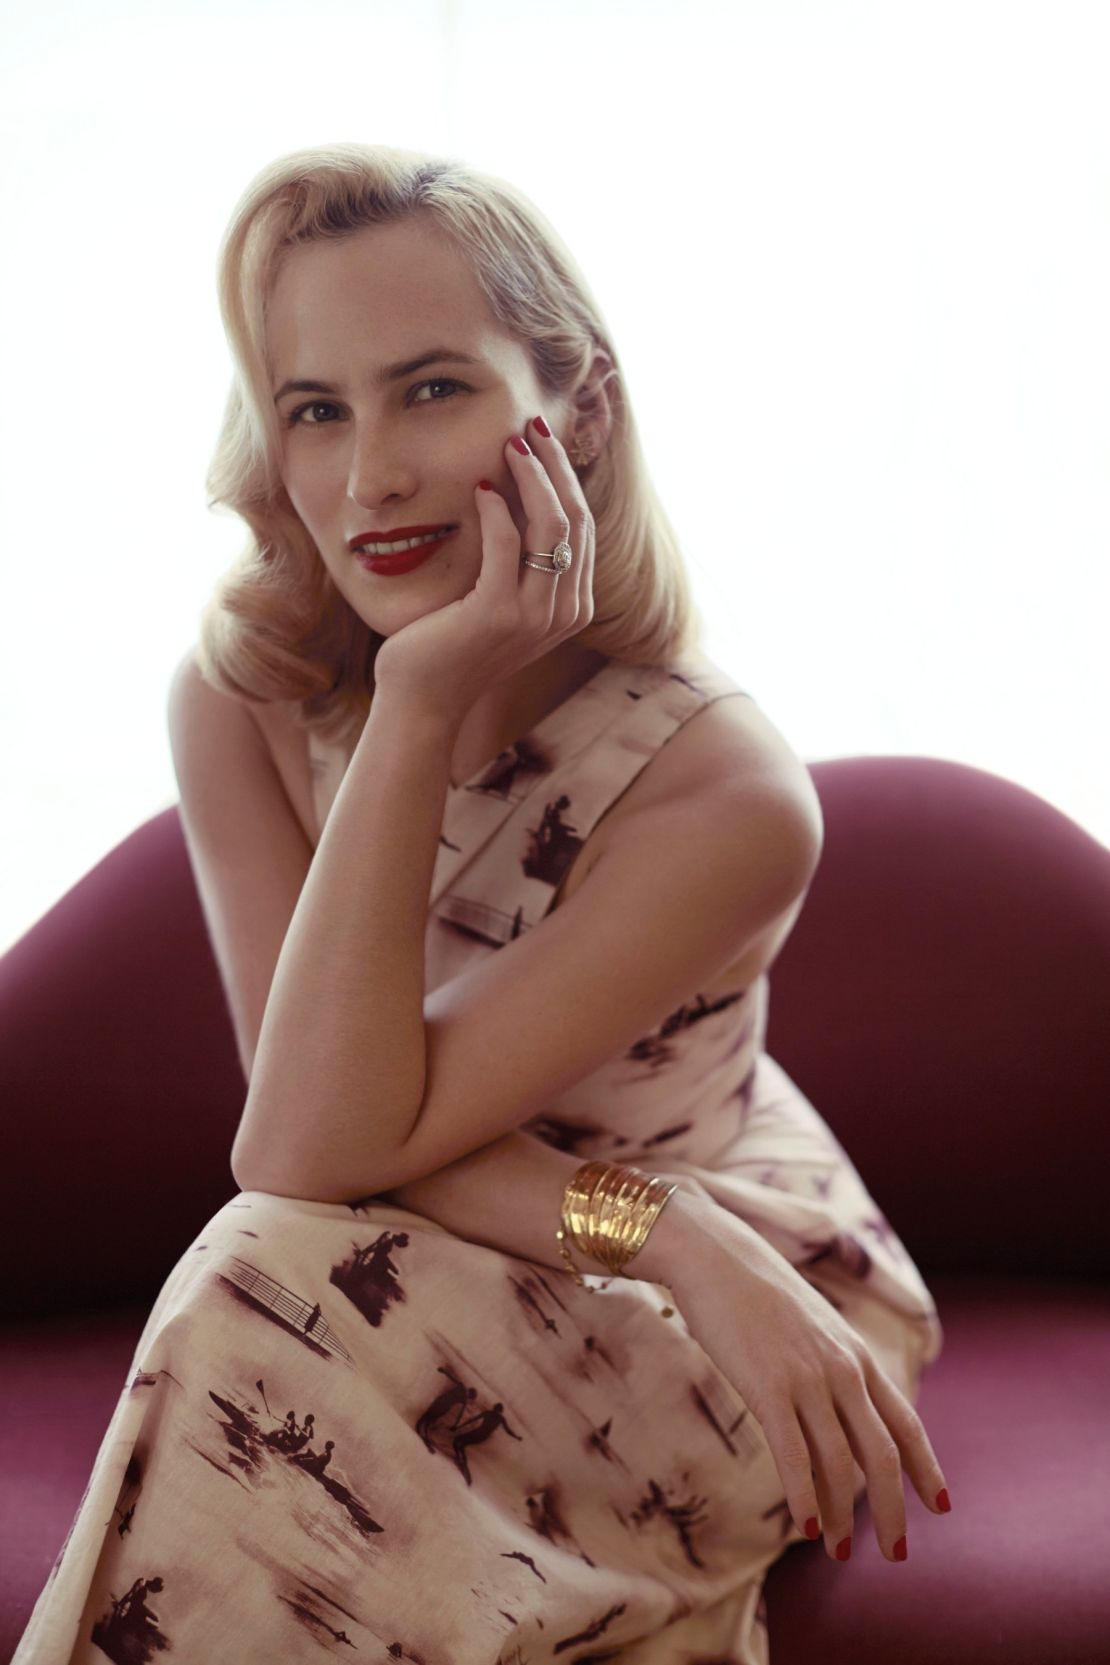 The Anglo-Brazilian Charlotte Dellal founded her shoe label, Charlotte Olympia, in 2008. 